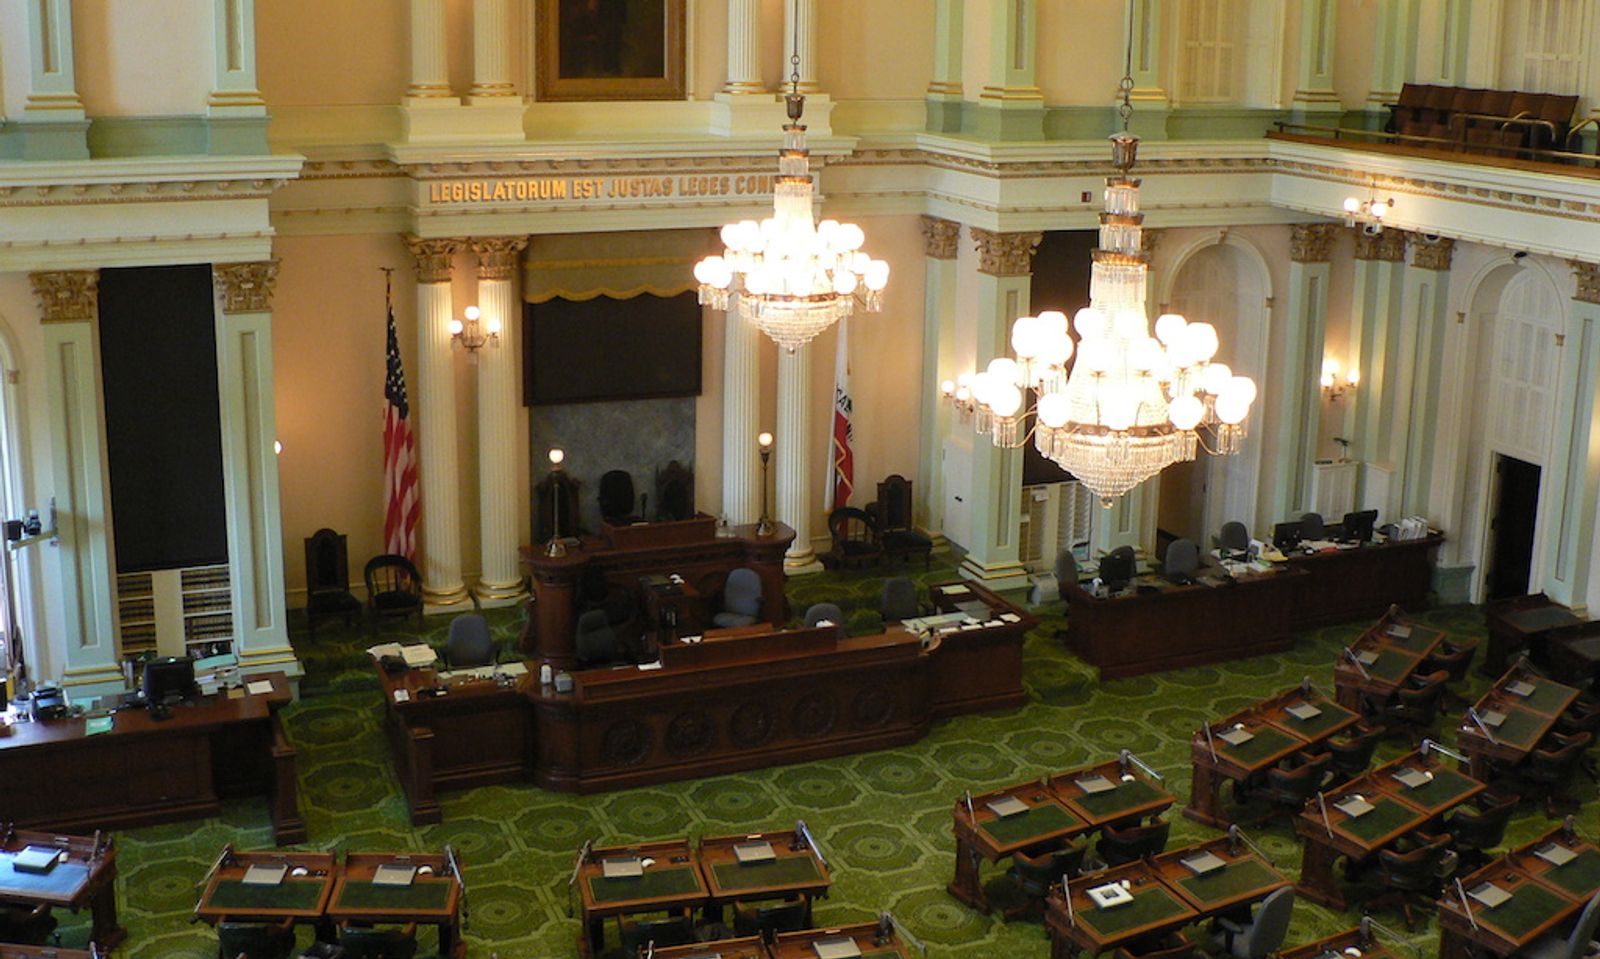 AB5 Repeal Vote Fails, But Law’s Support in Assembly Has Dipped